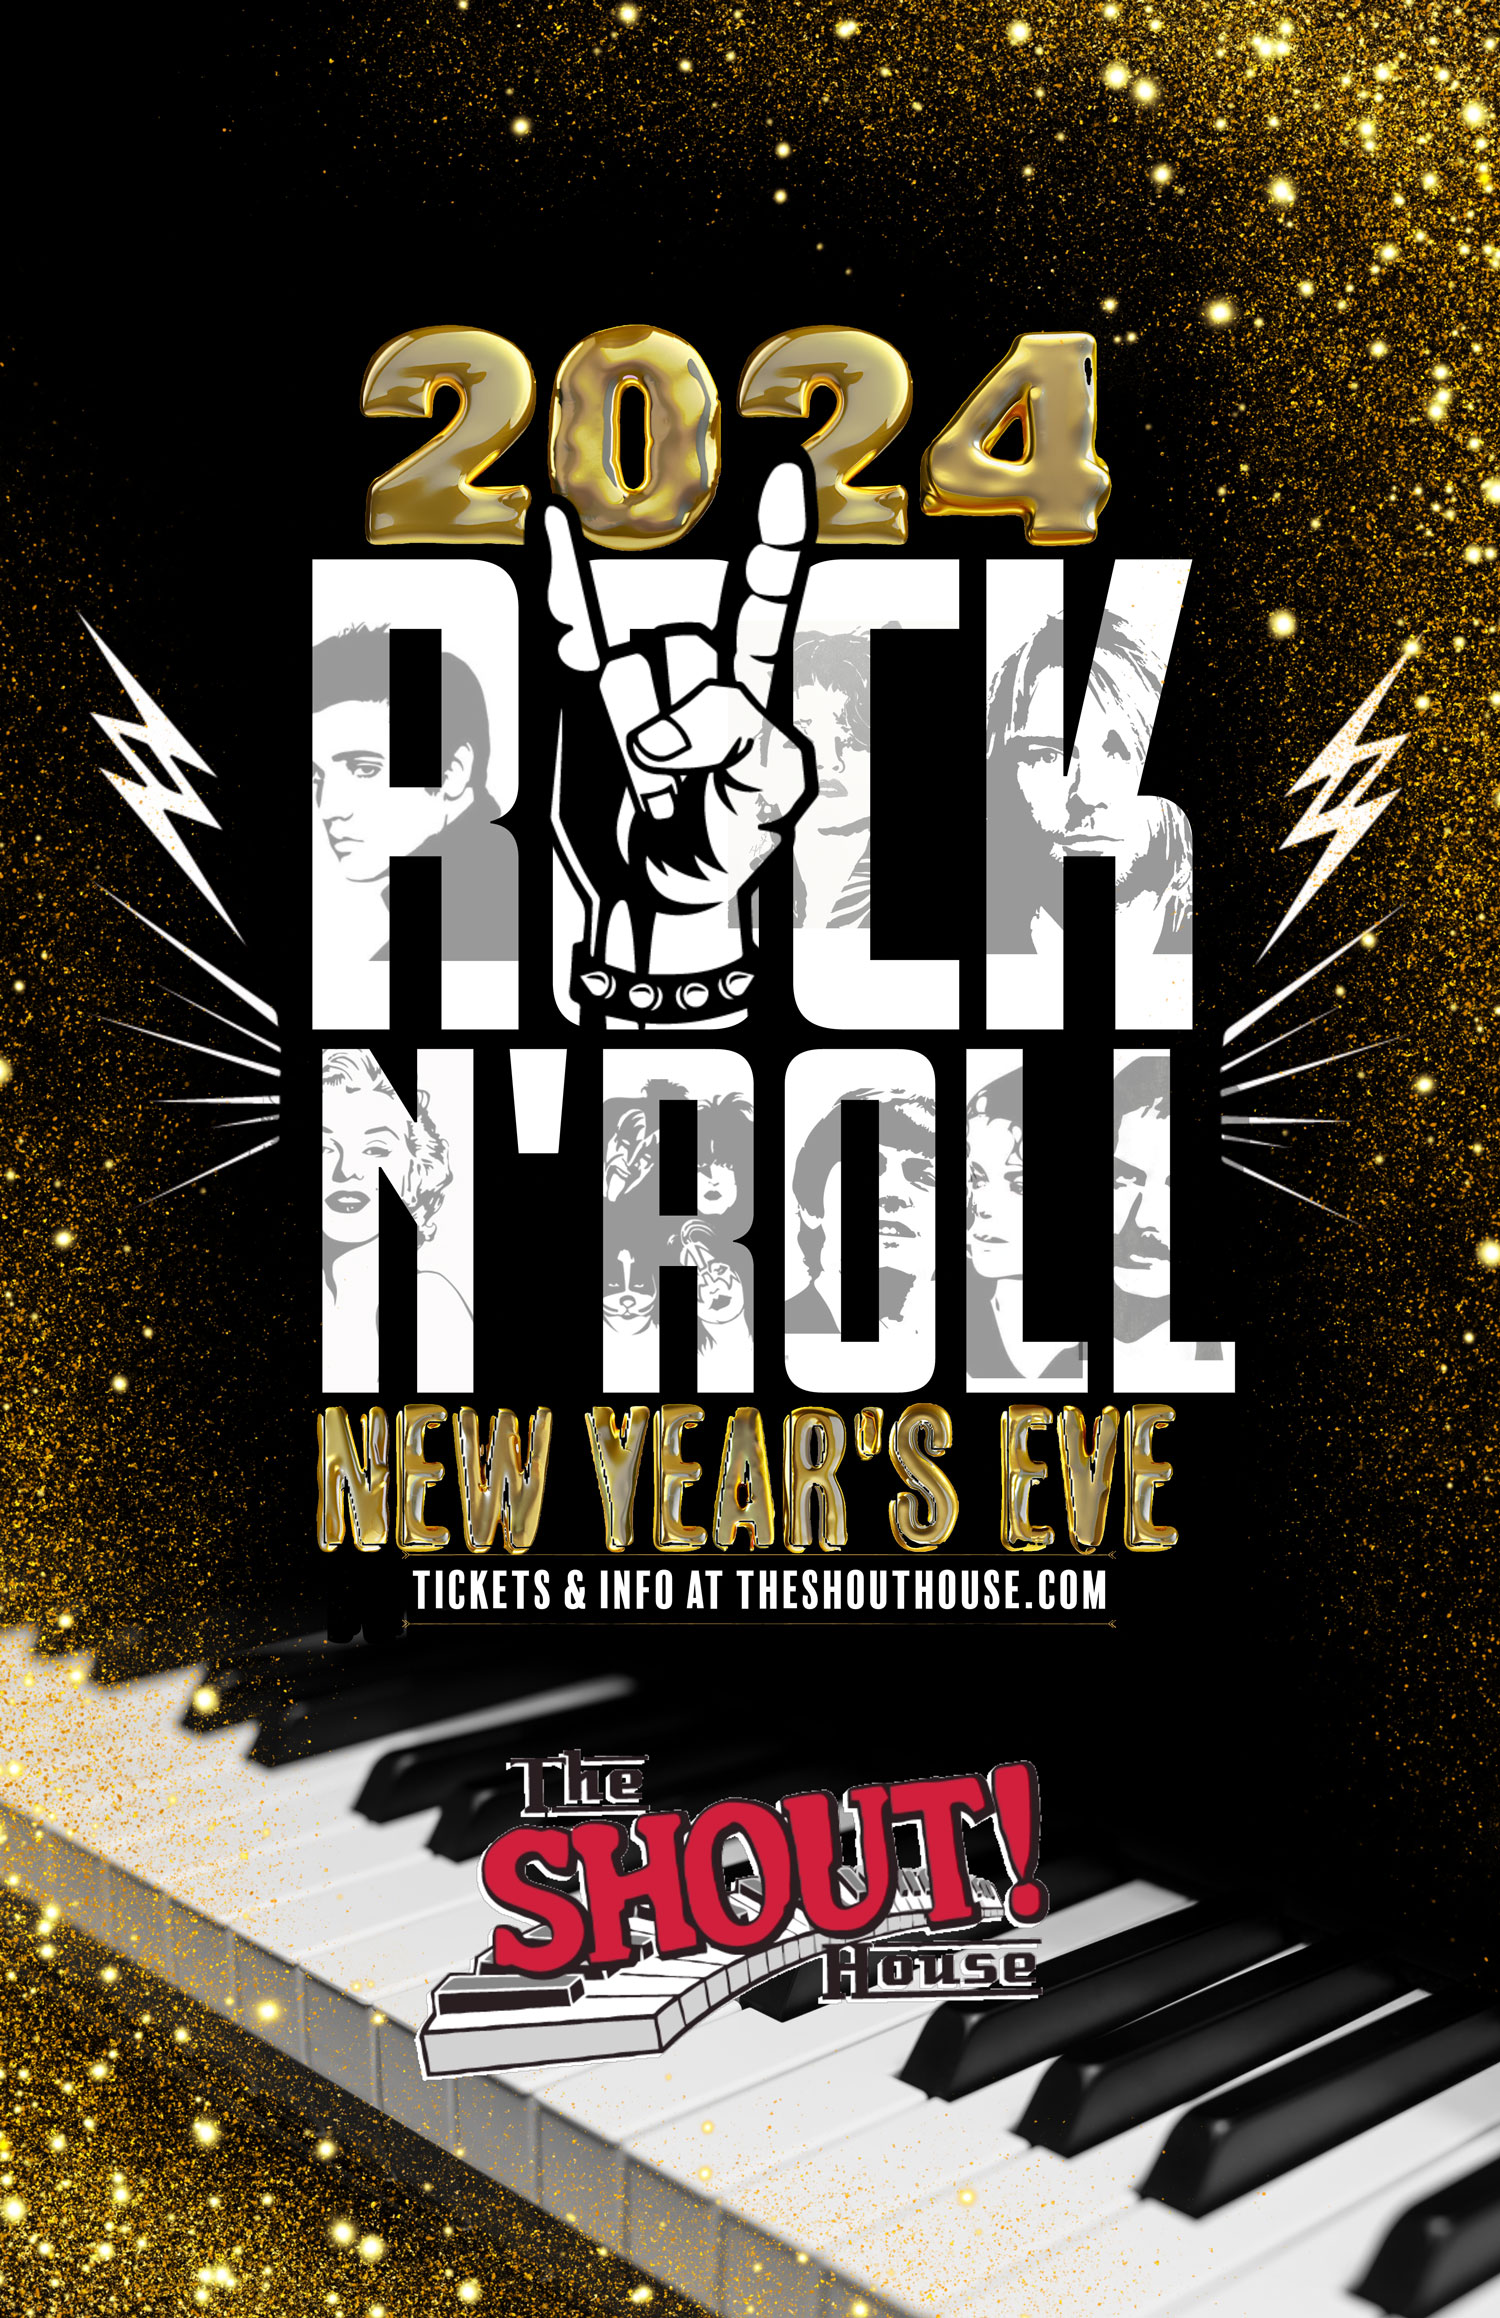 Rock n' Roll New Year's Eve - SOLD OUT - The Shout! House